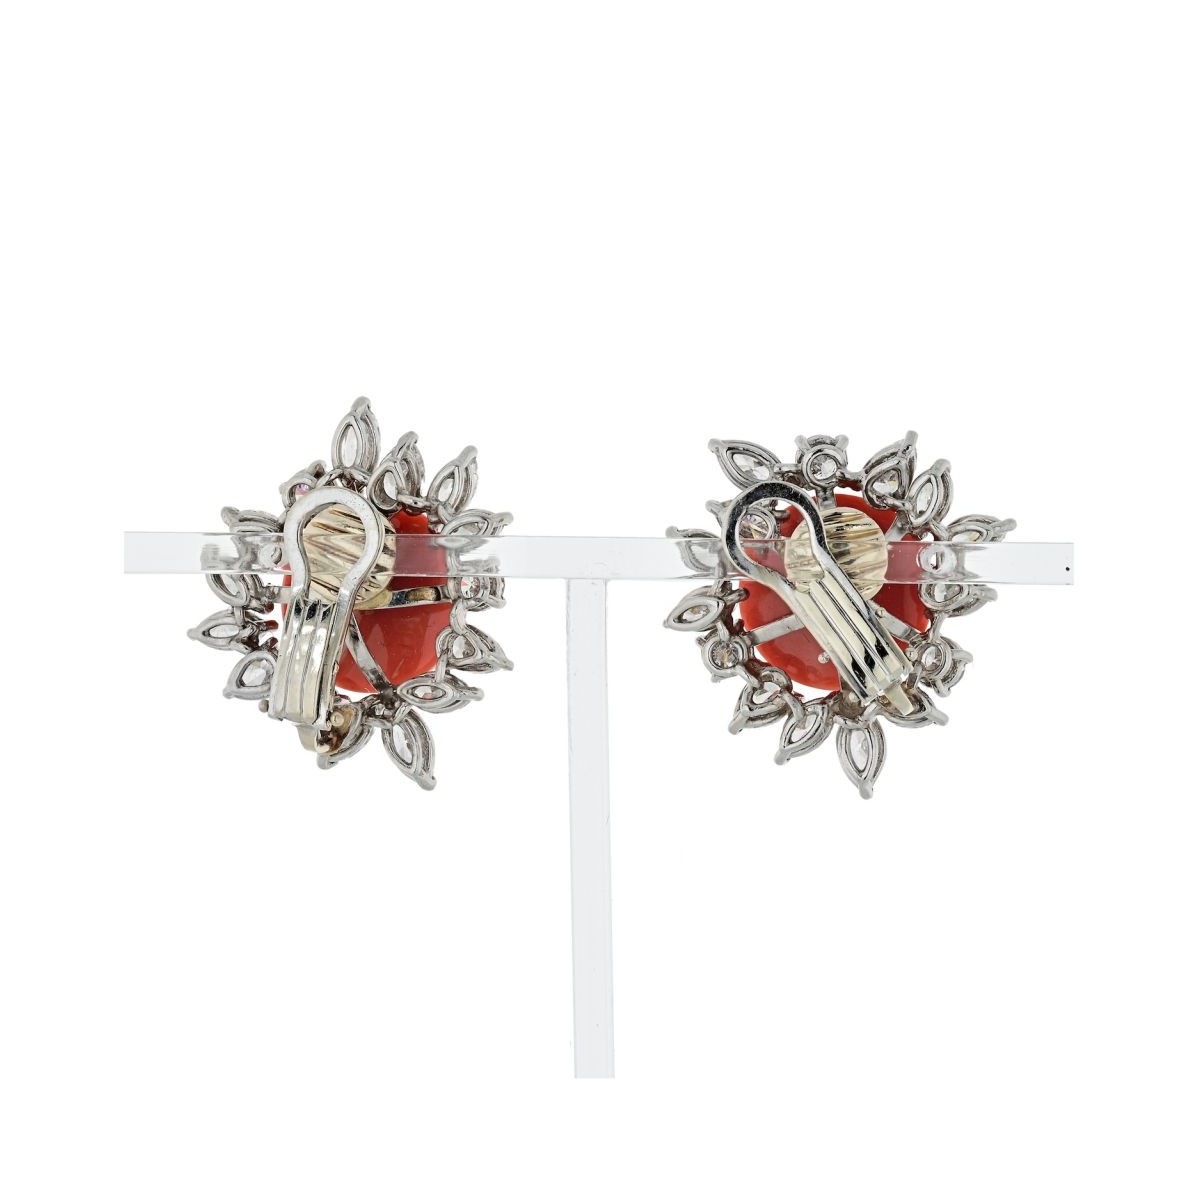 Diamond, Coral and Platinum Earrings